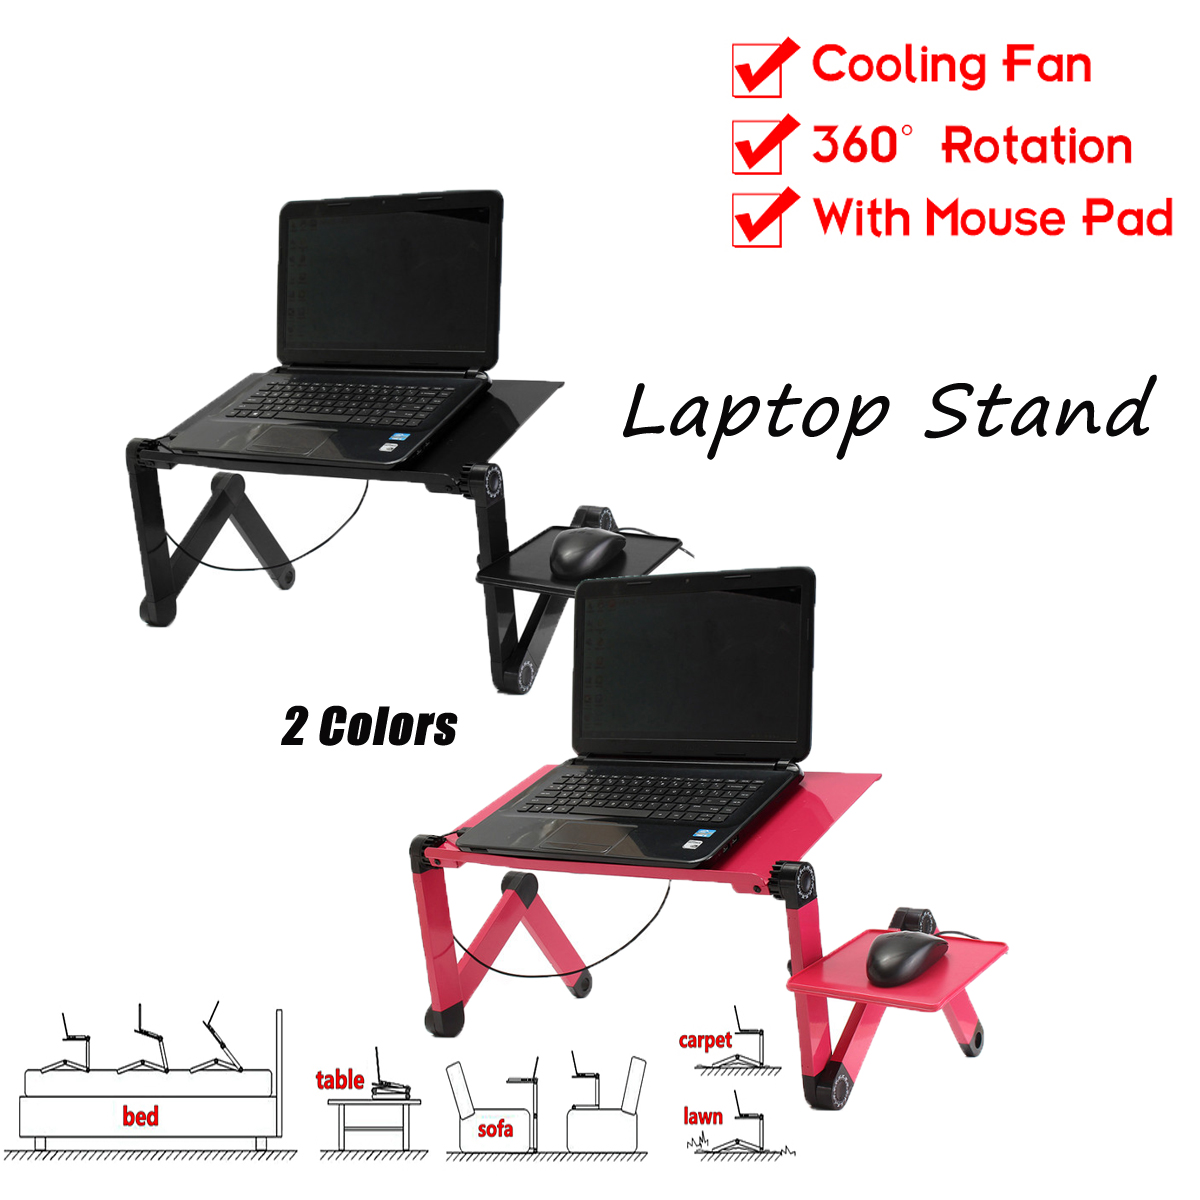 Foldable-Laptop-Table-Stand-Portable-Adjustable-Stand-Bed-Tray-with-Cooling-Fan-and-Mouse-Pad-1121117-2